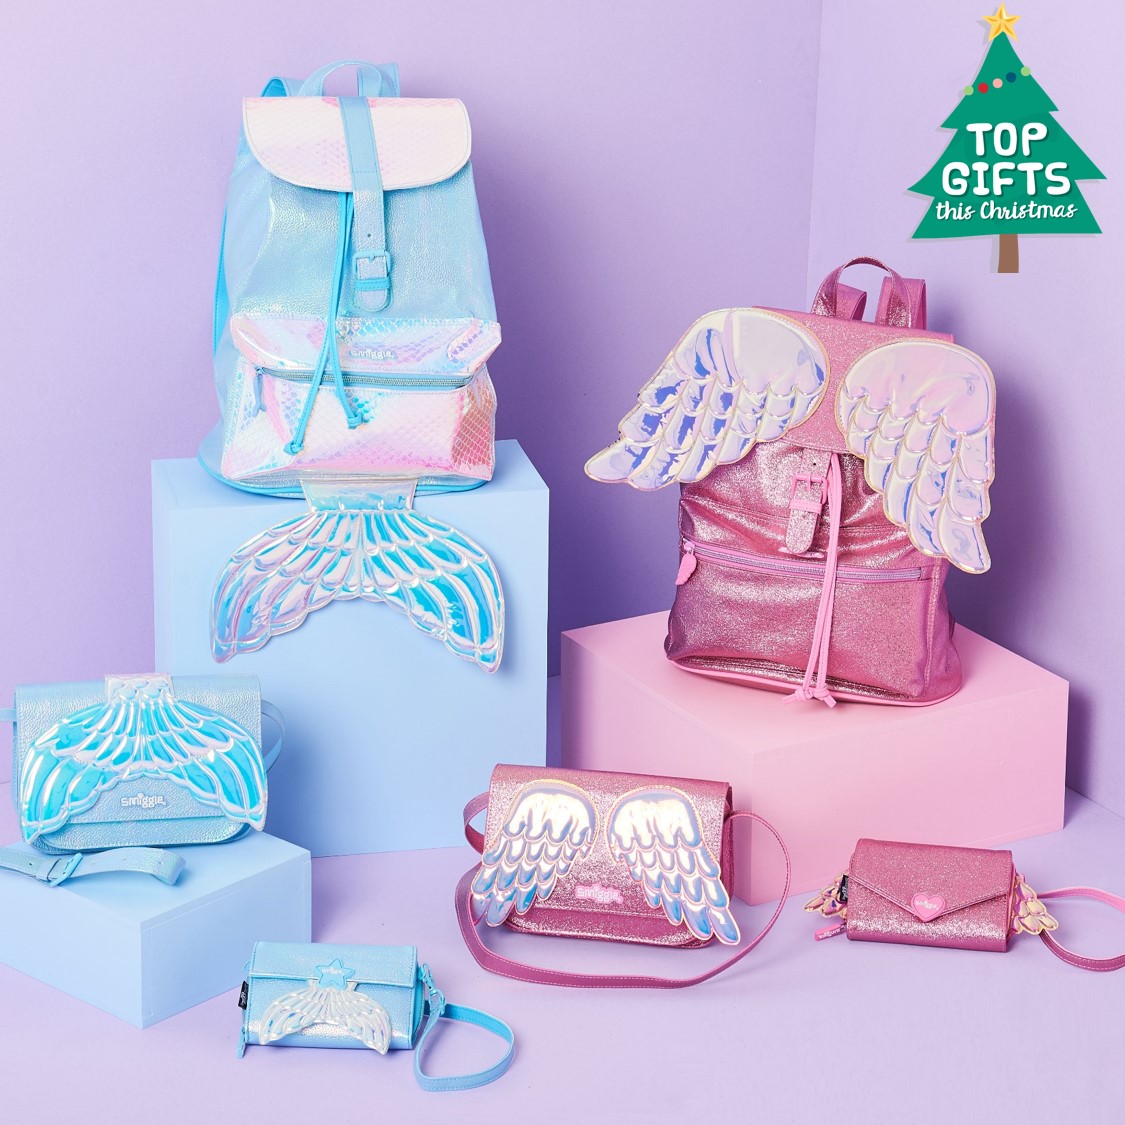 We 💖 Unicorns & Mermaids ! our new magical collection is the perfect christmas gift! get the set instore now! 😍